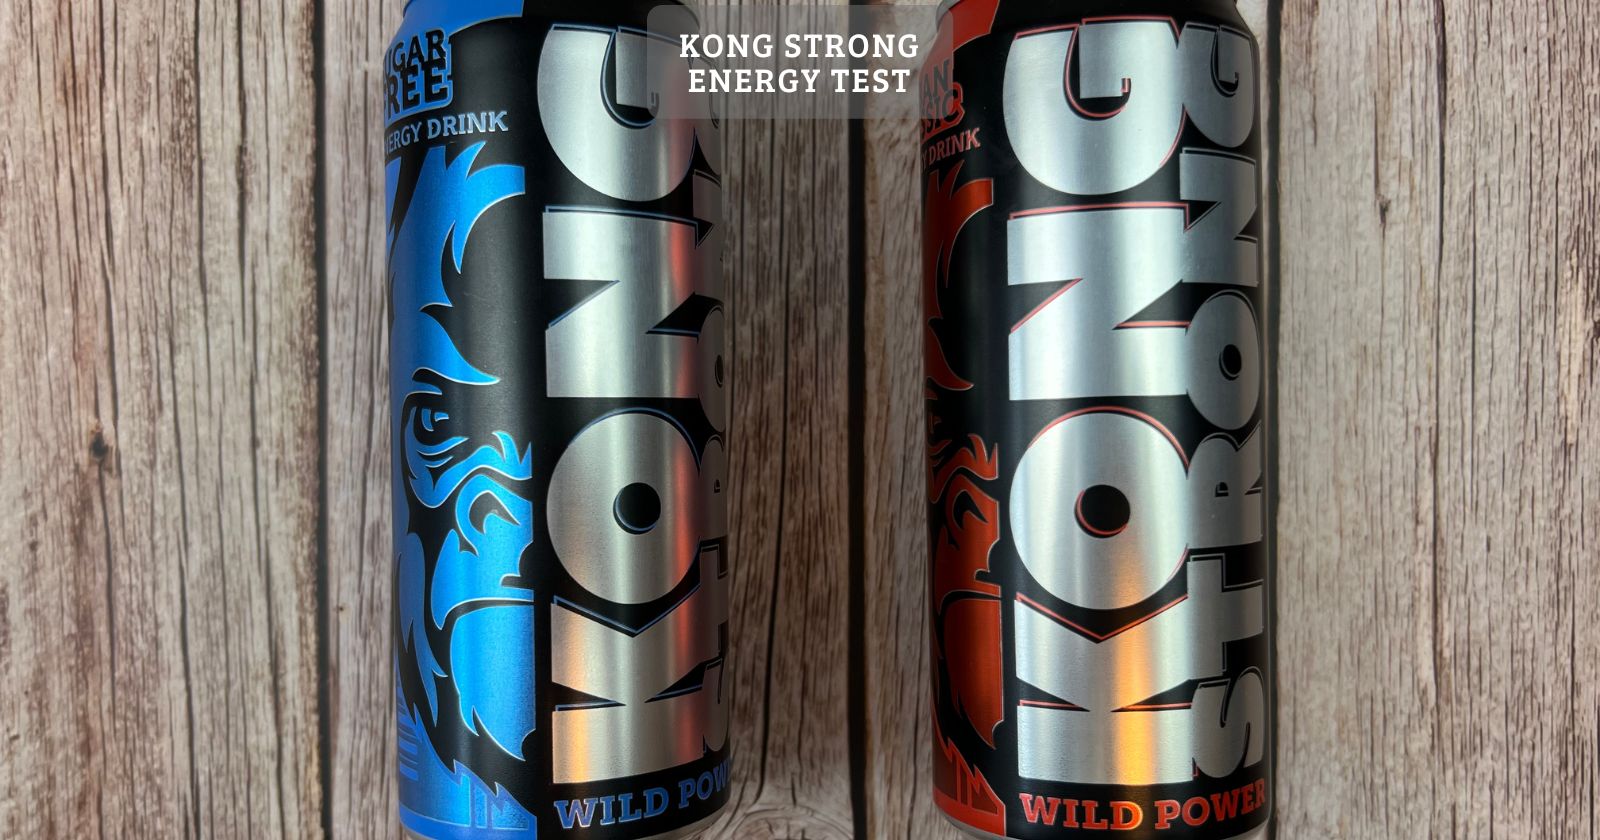 Kong strong energy drink test